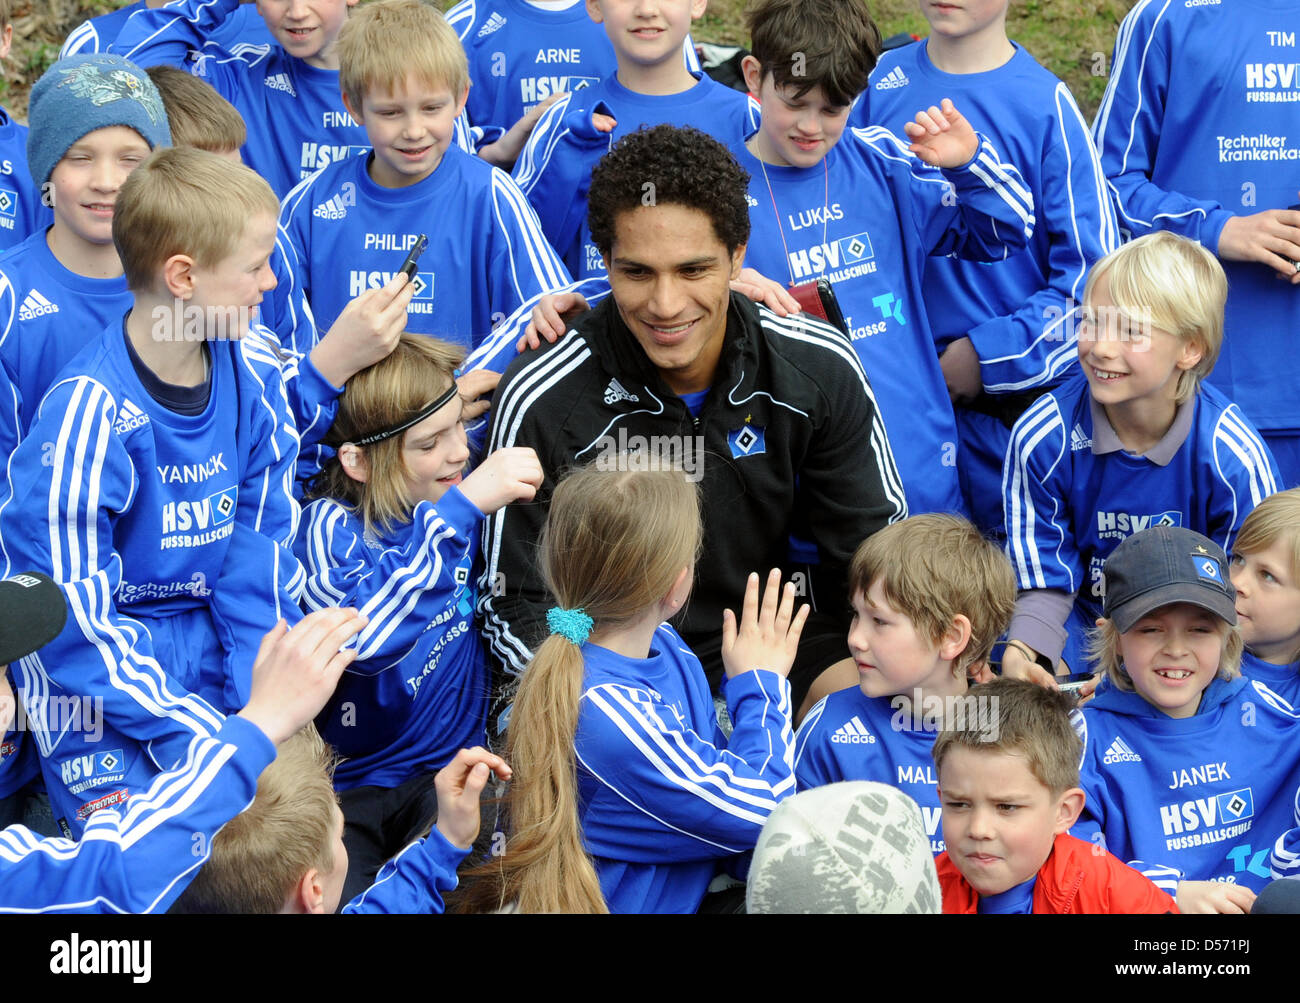 Hamburg's José Paolo Guerrero (C) poses for a photo with children of the HSV soccer school after a training session of German Bundesliga soccer club SV Hamburg in Hamburg, Germany, 06 April 2010. After the goalless draw in the Bundesliga match against Hanover 96 on 04 April 2010, Guerrero threw a drinking bottle in a fan's face who had provoked him before. Guerrero could be suspend Stock Photo